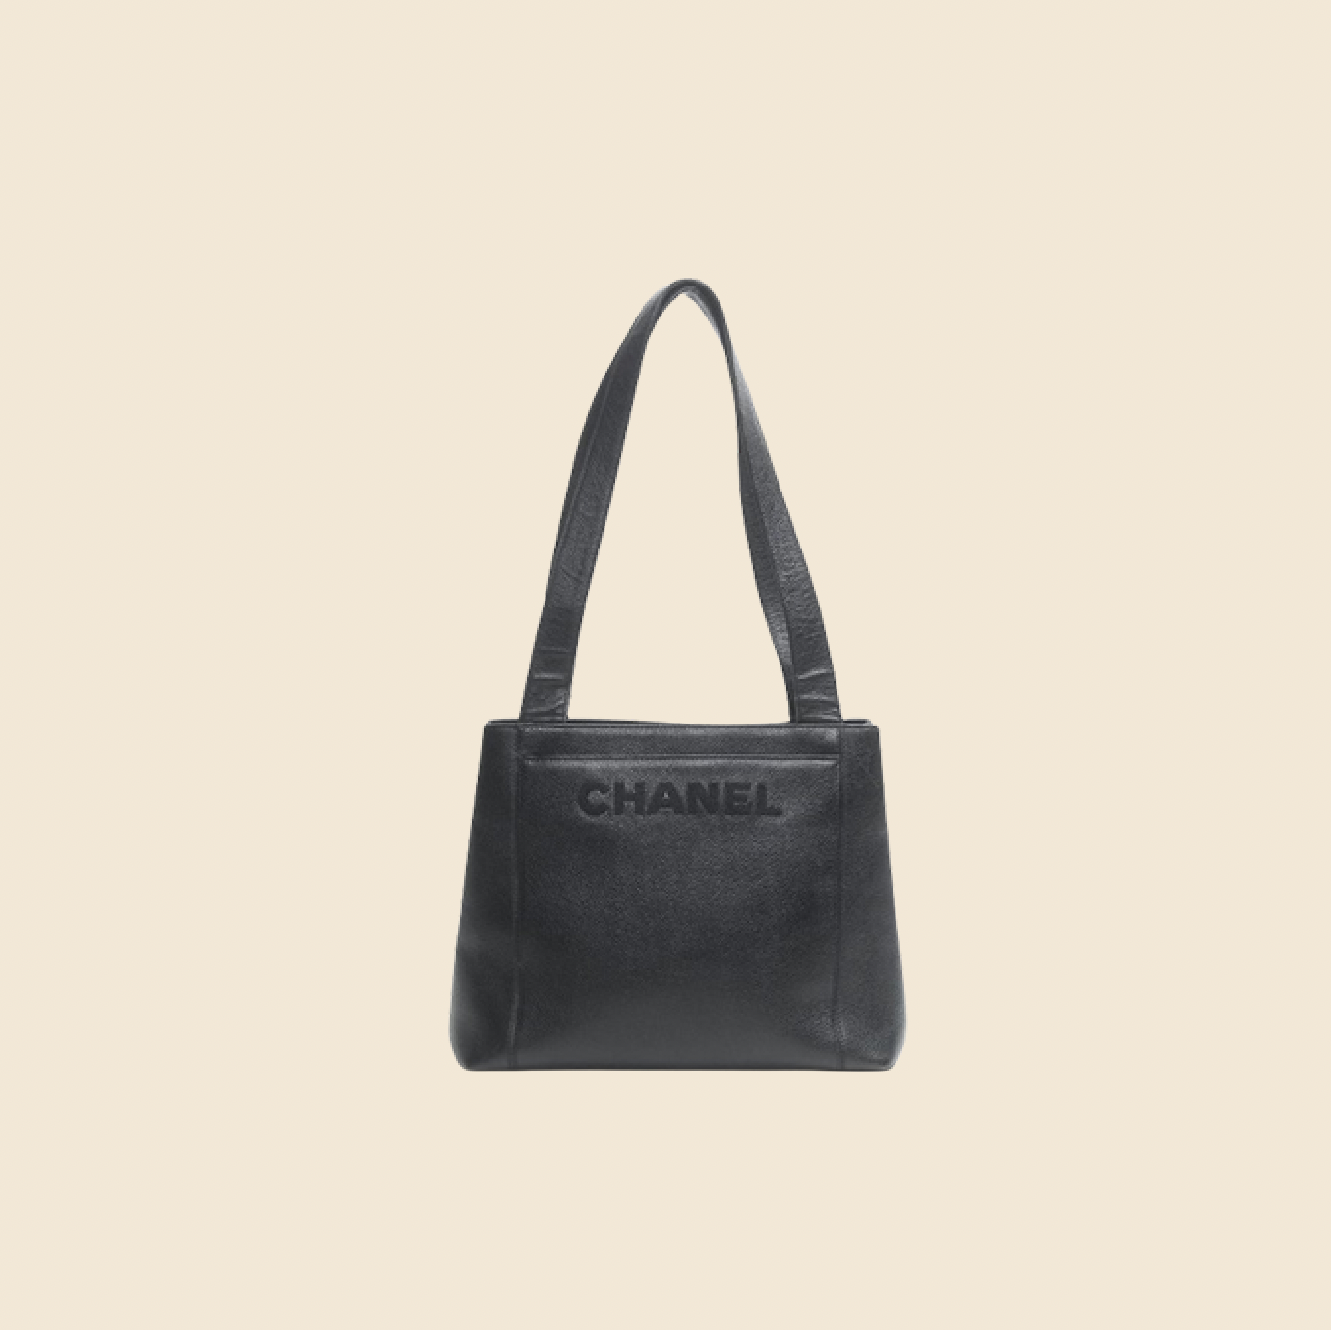 CHANEL 1990s EMBROIDERED BLACK CAVIAR LEATHER TOTE BAG